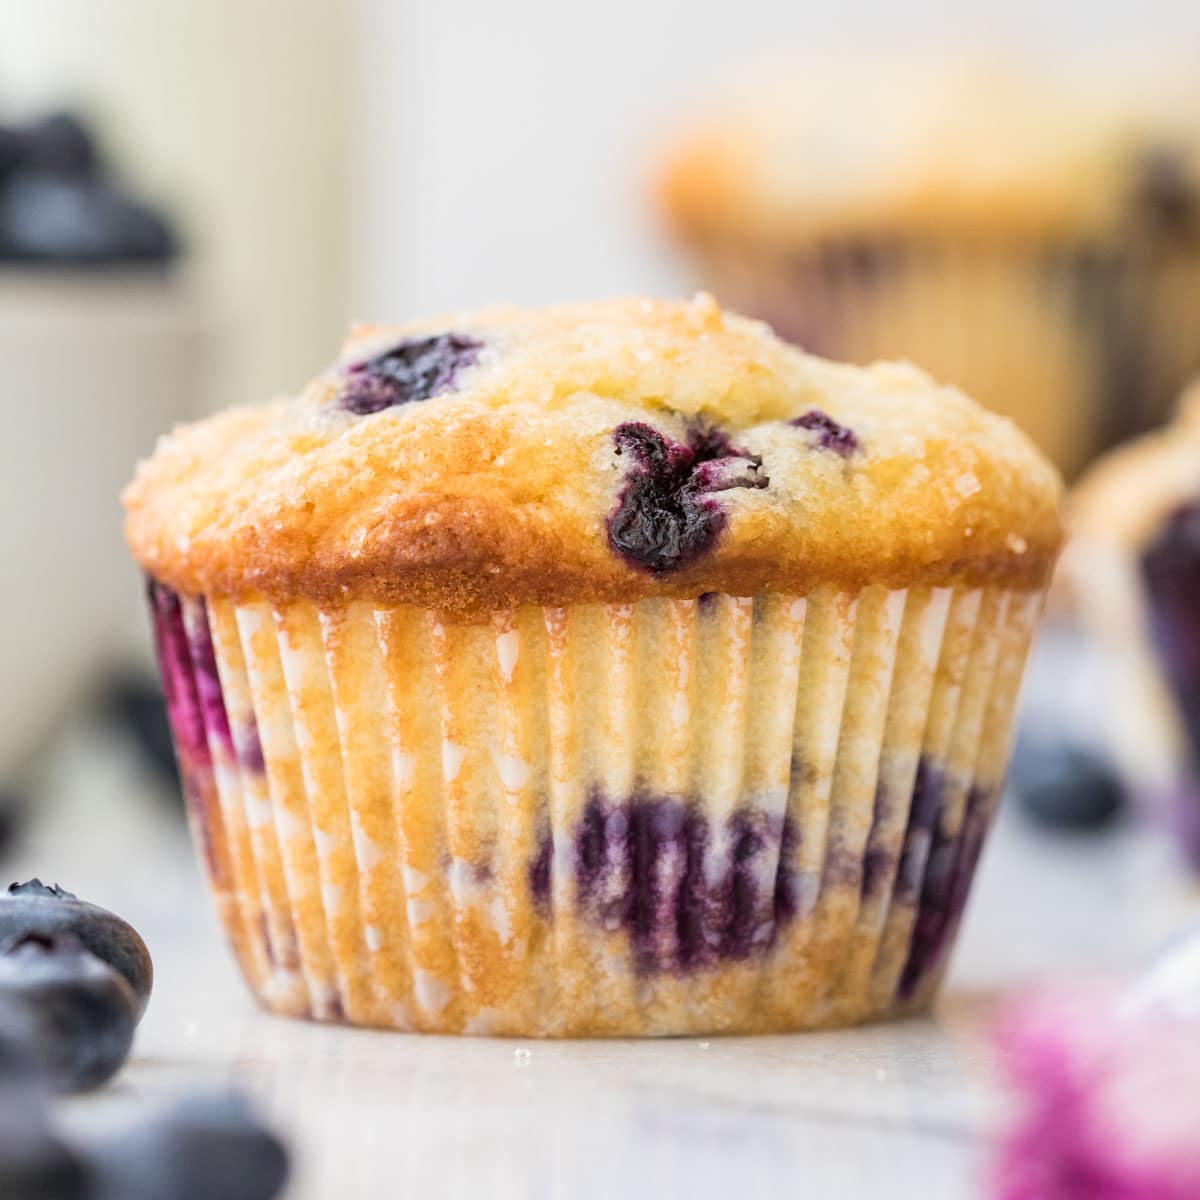 Cooking With My Food Storage: Amazing Blueberry Muffins-Make your own mix